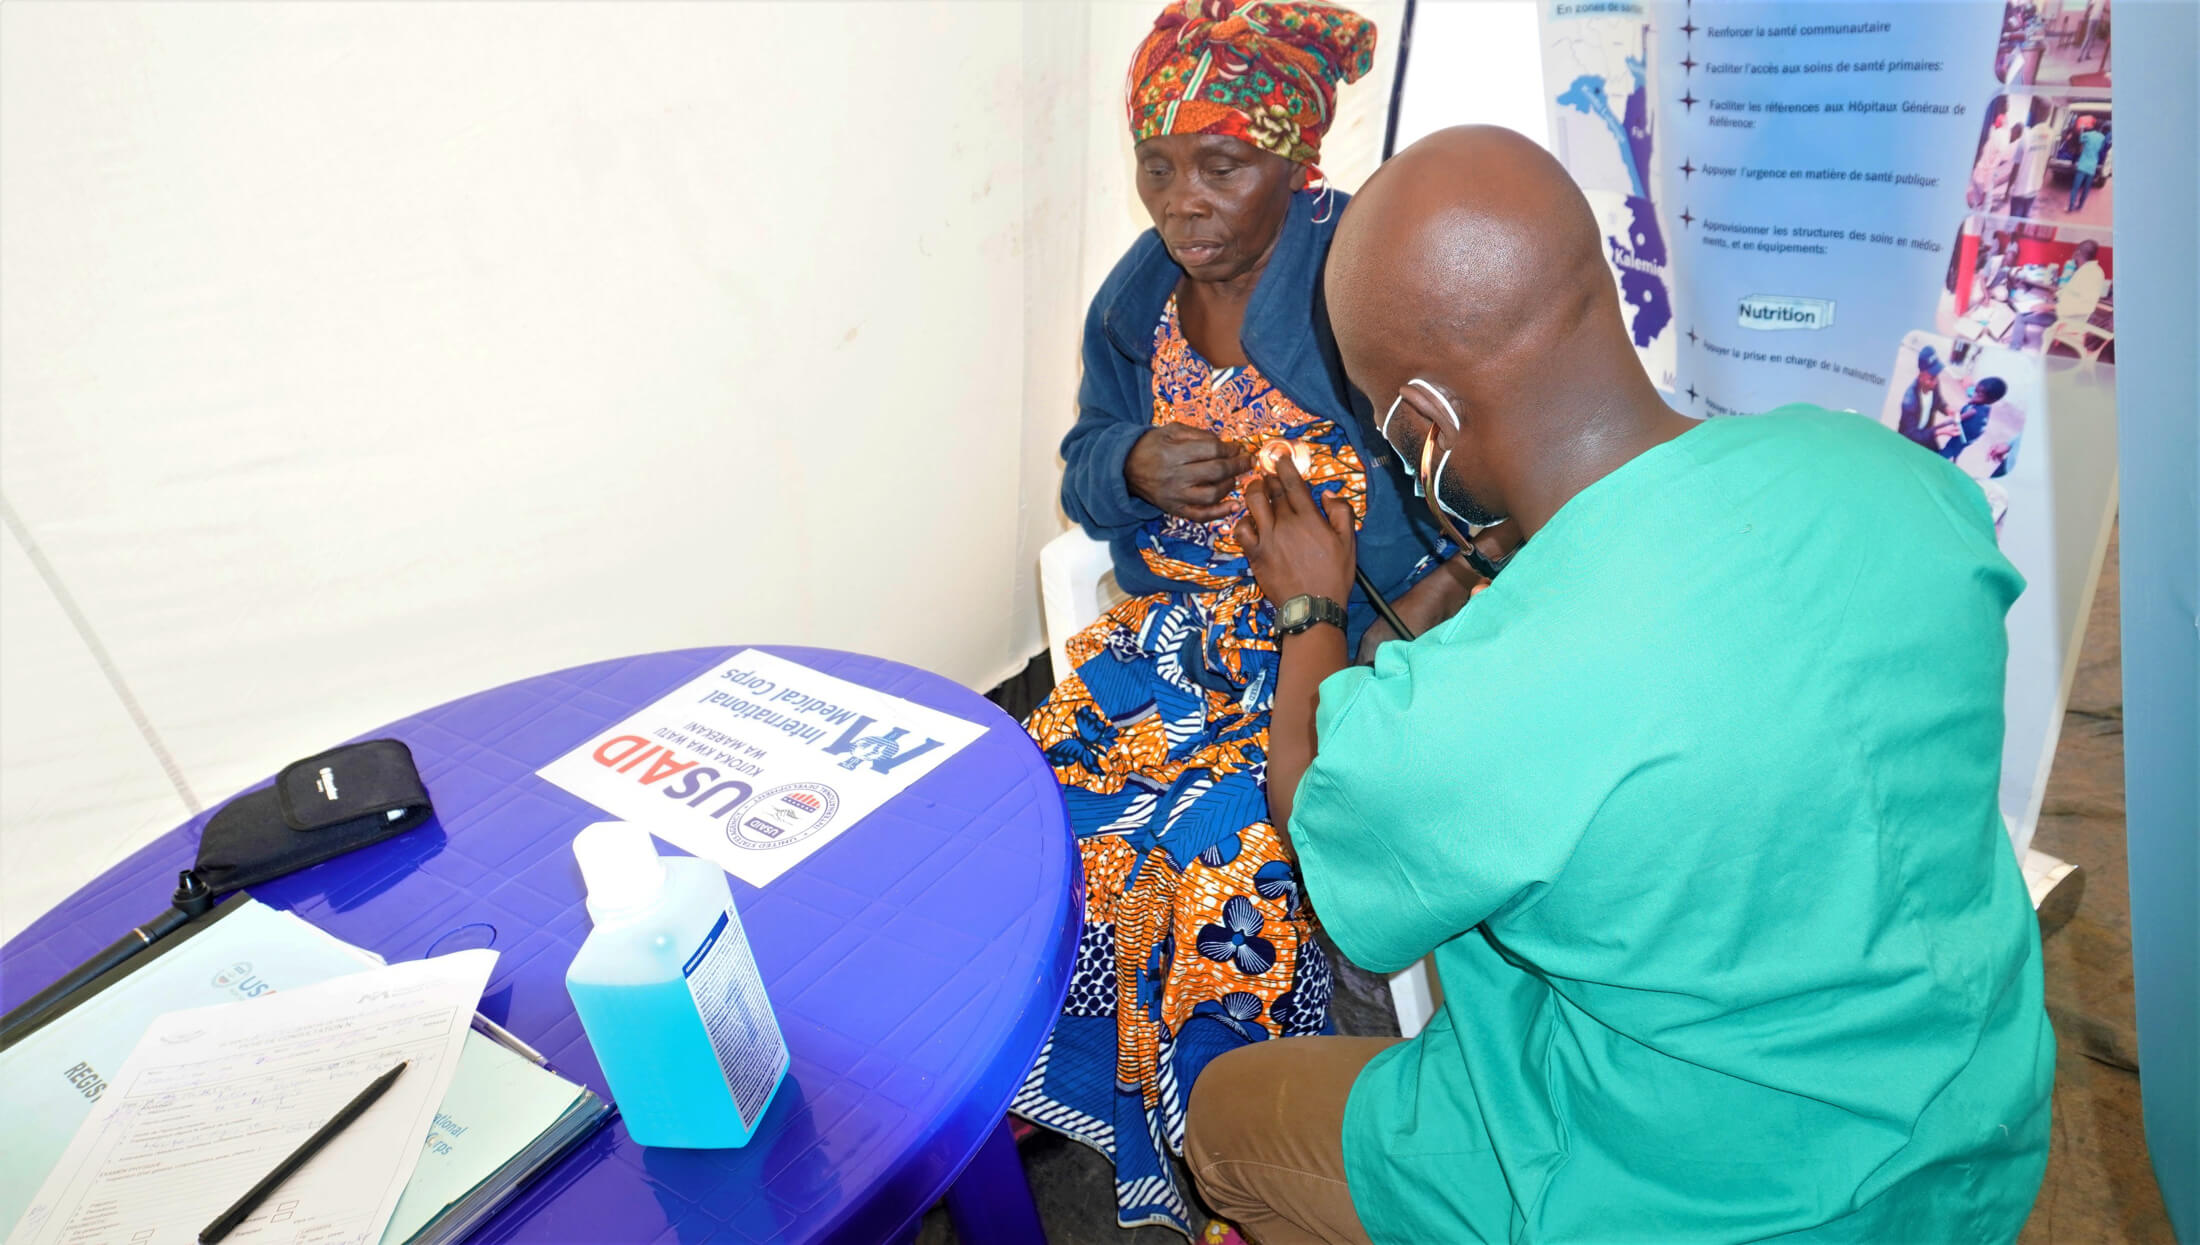 Dr. Bienvenu Mosangu consults with an internally displaced woman during the mobile health clinic.